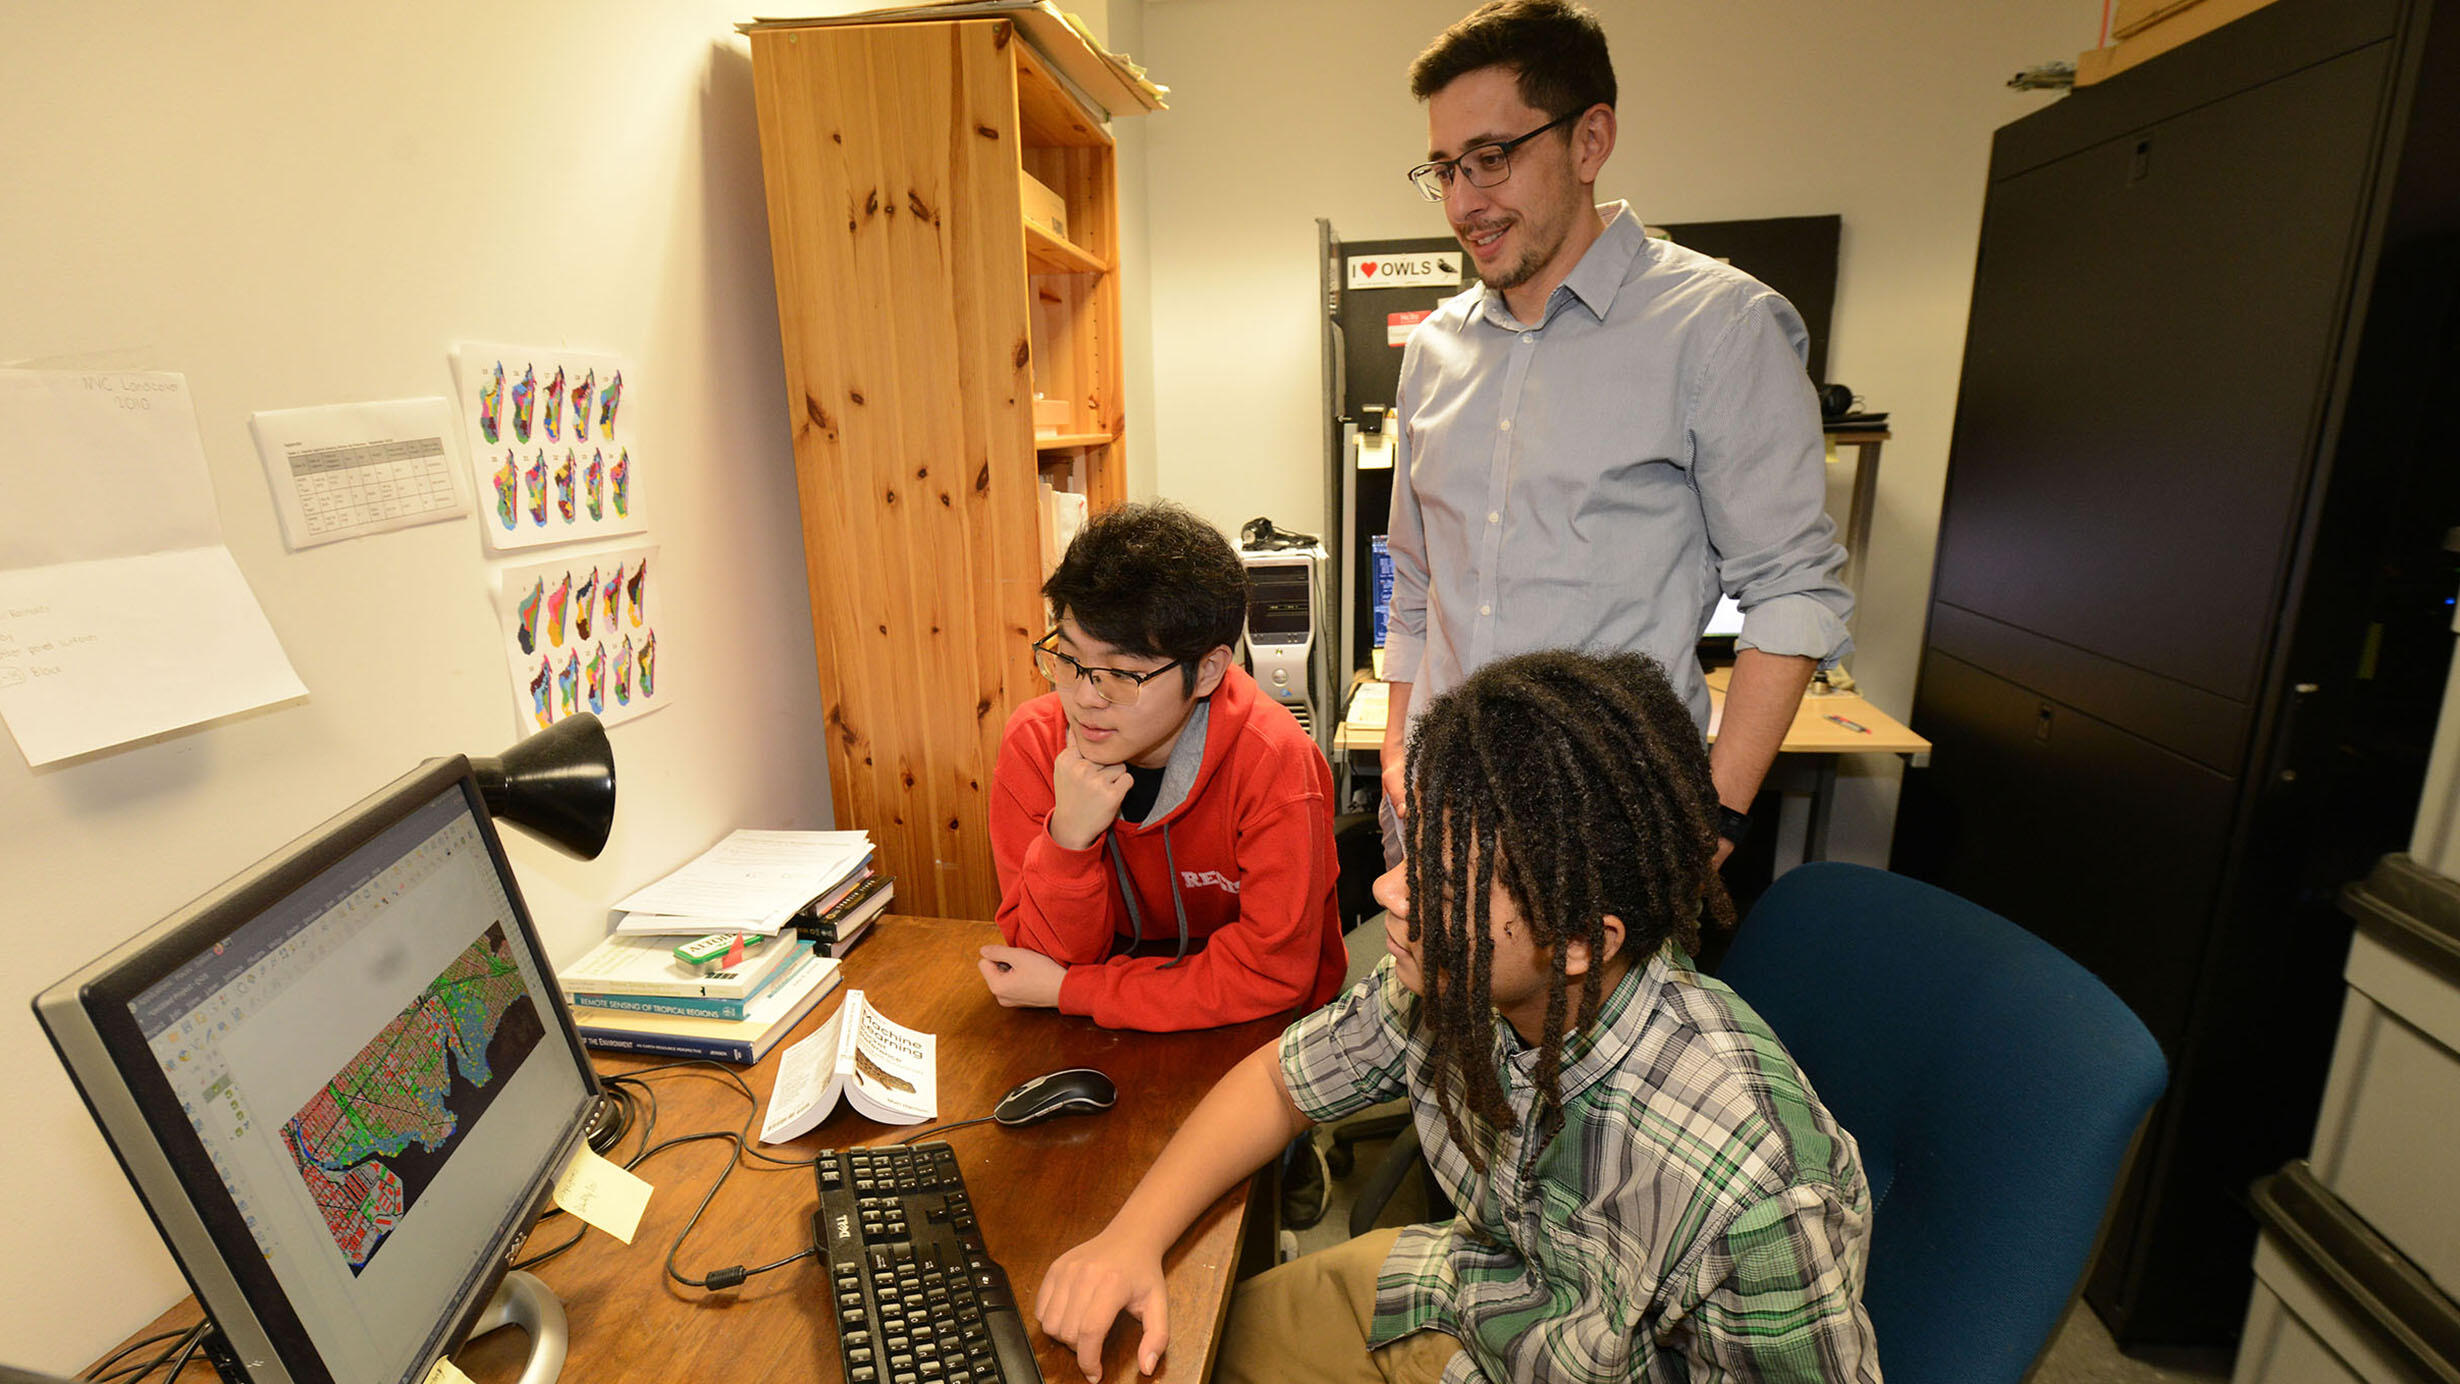 Two students sit at desk and look at a computer monitor while their mentor stands behind them.